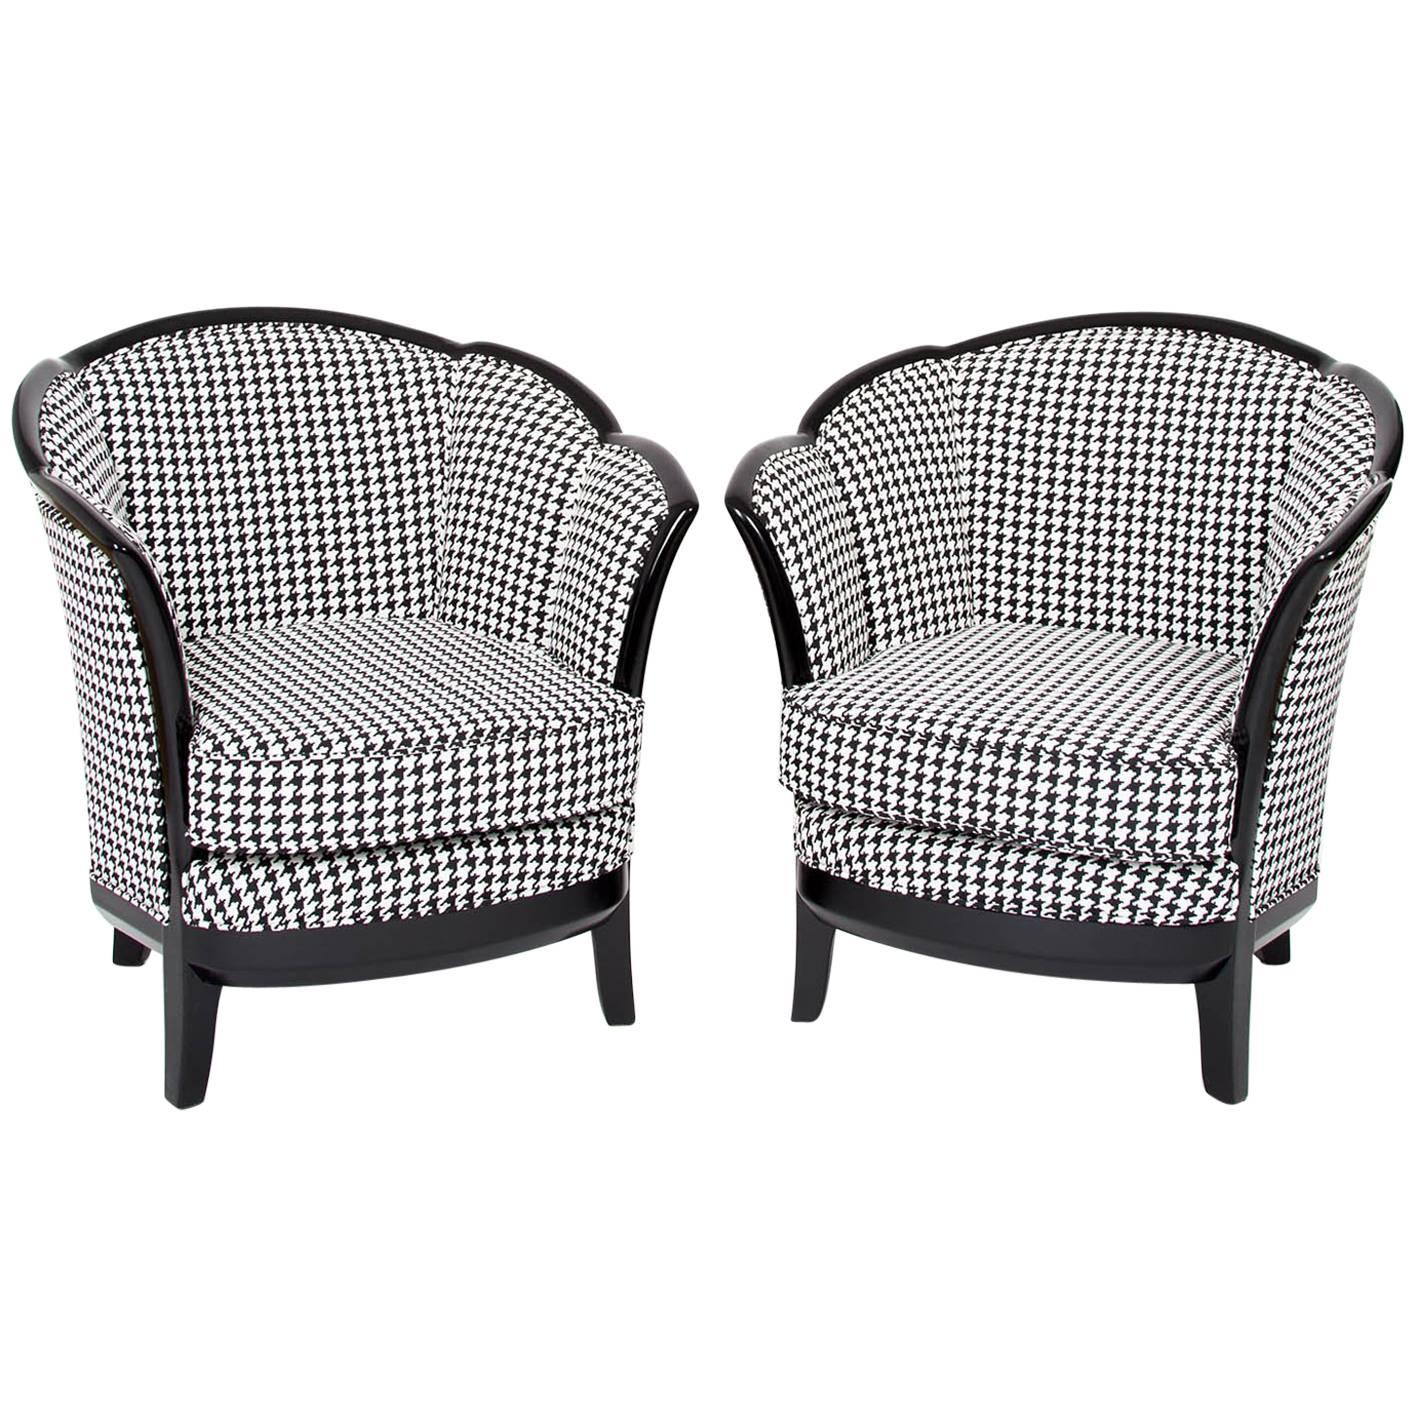 Two French Art Deco Club Chairs, France 1930s in Black-White Fabric Upholstery